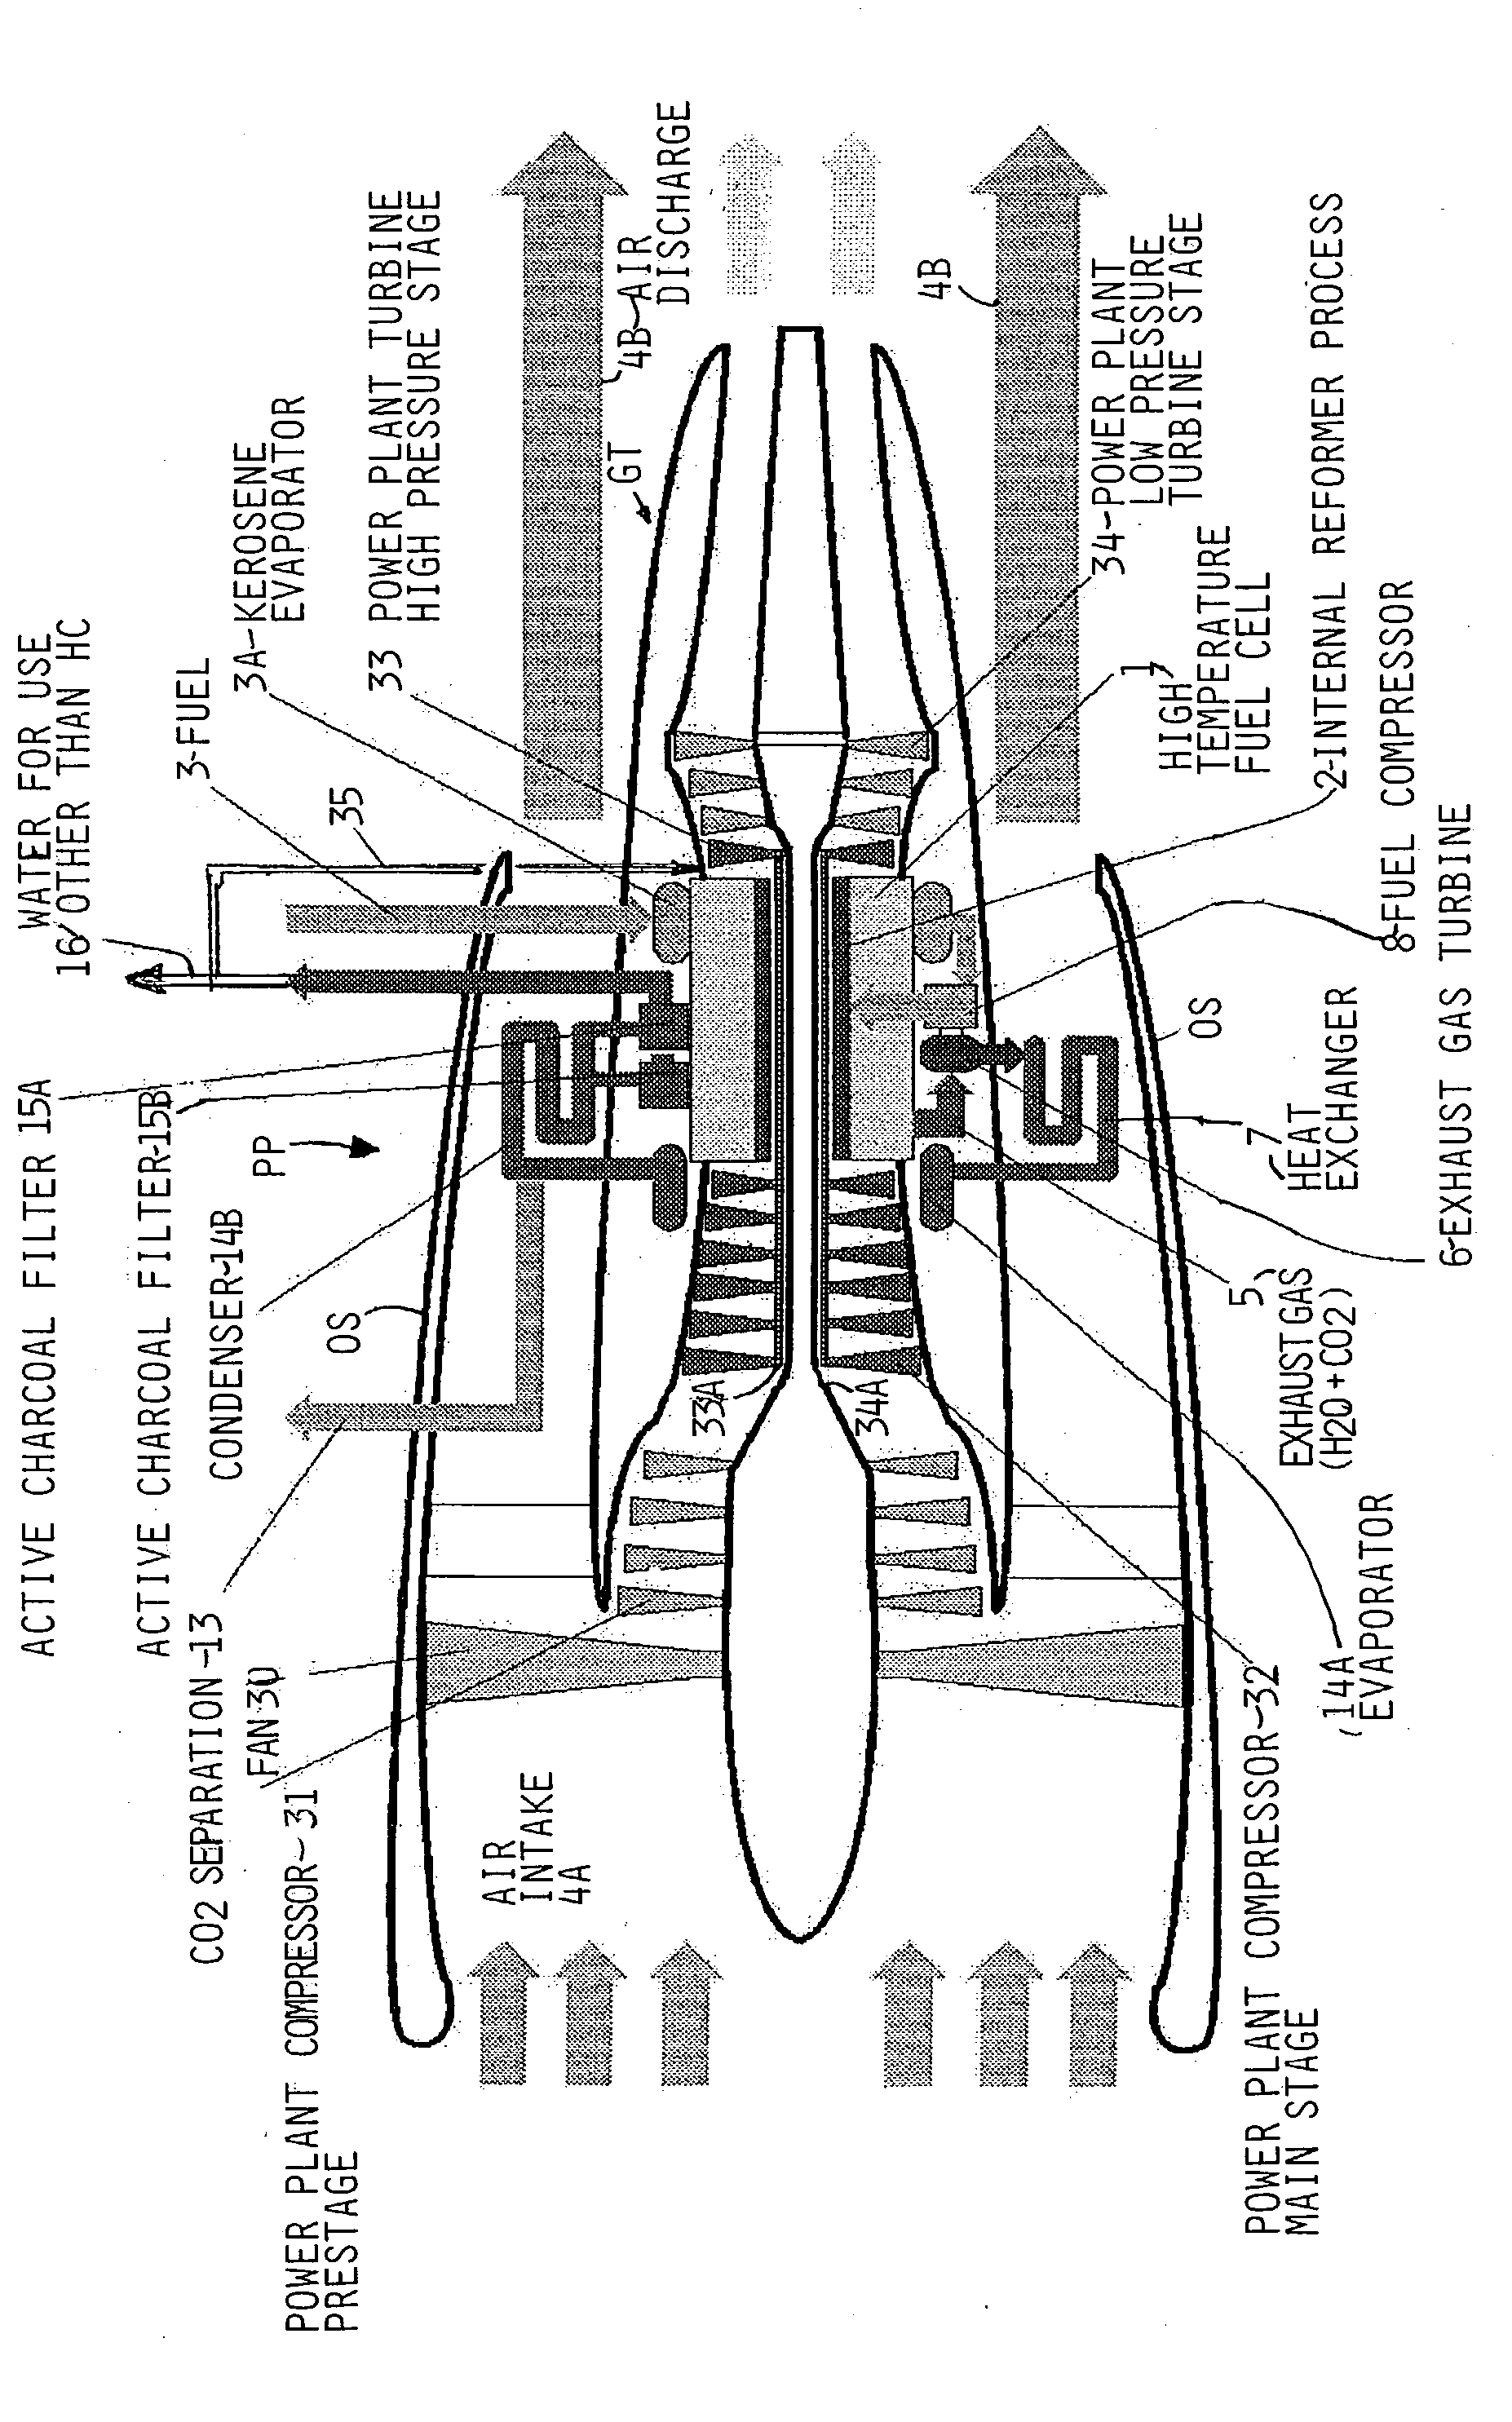 Apparatus for producing water onboard of a craft driven by a power plant